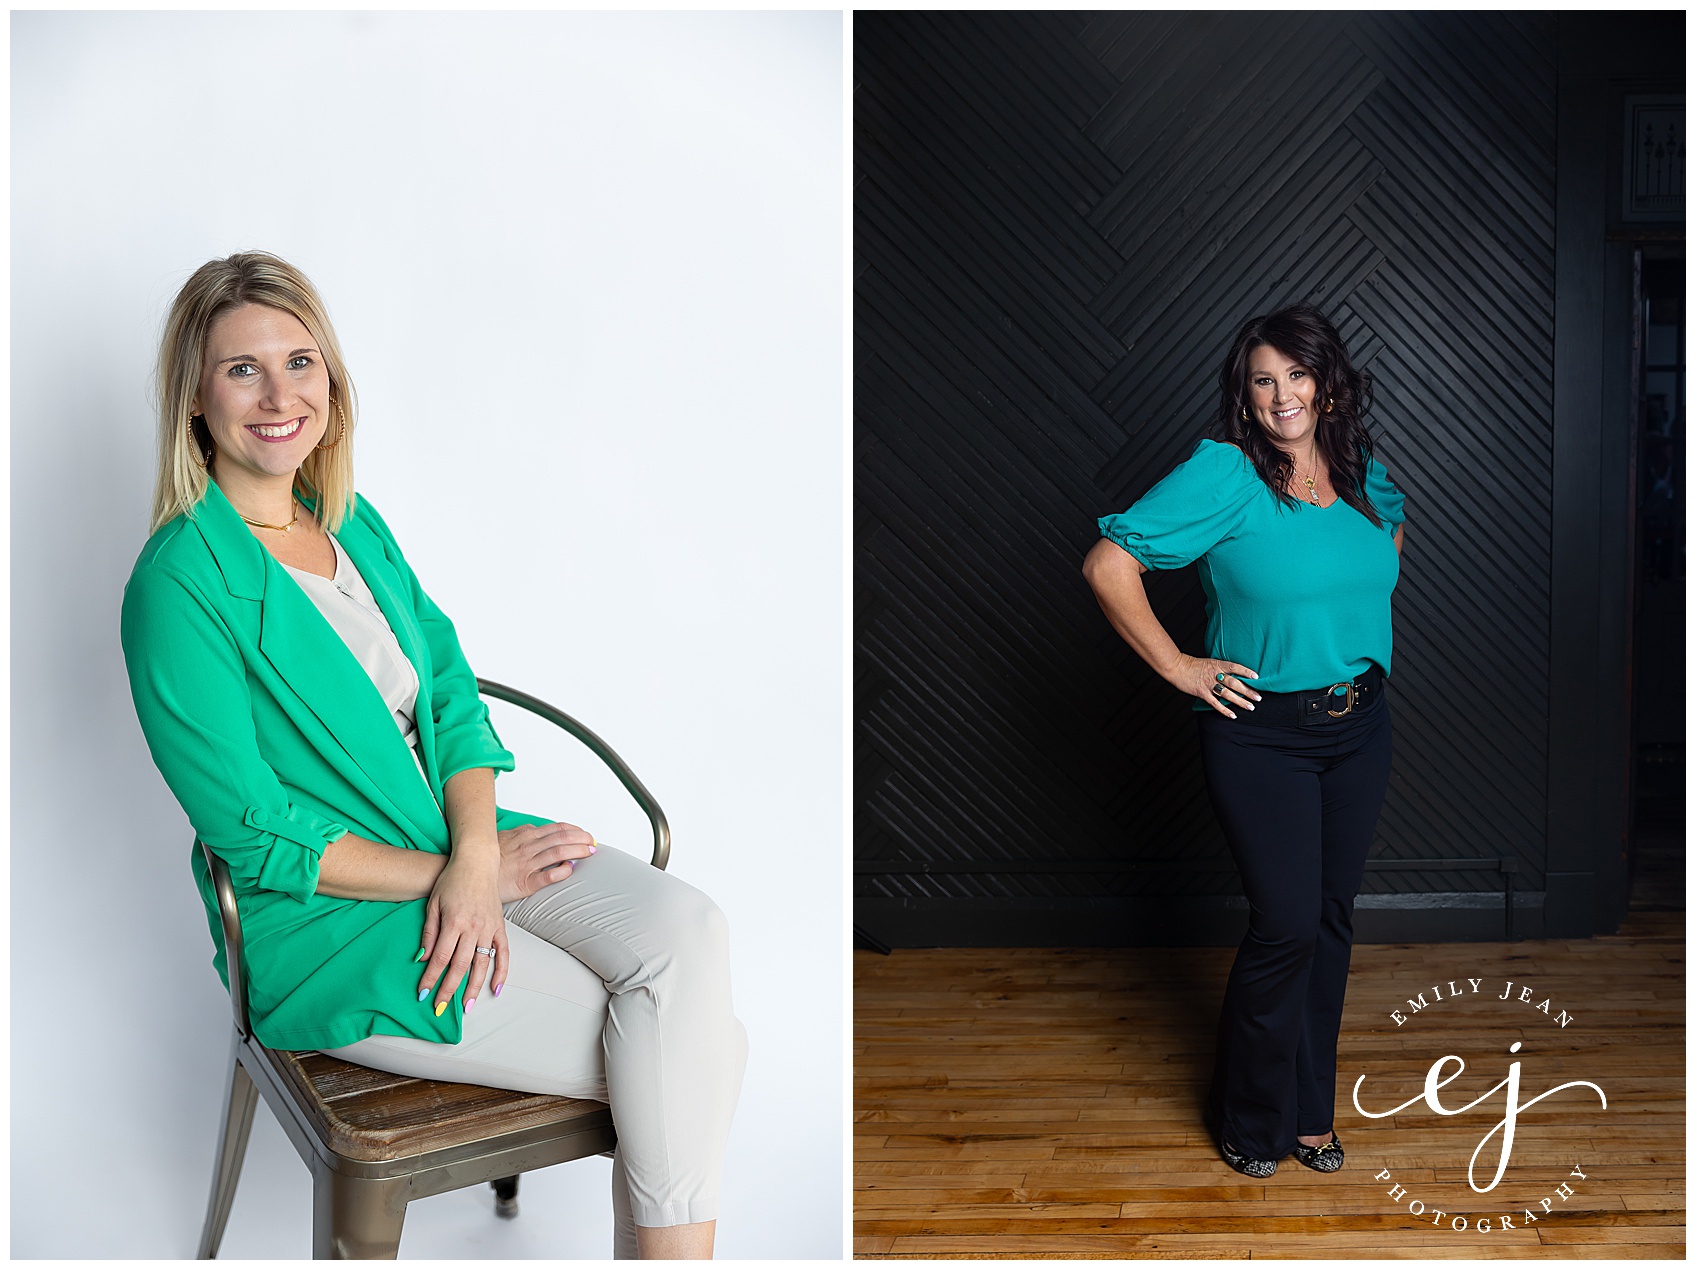 hilary hoff and katie johnson real estate agent pose against backdrops